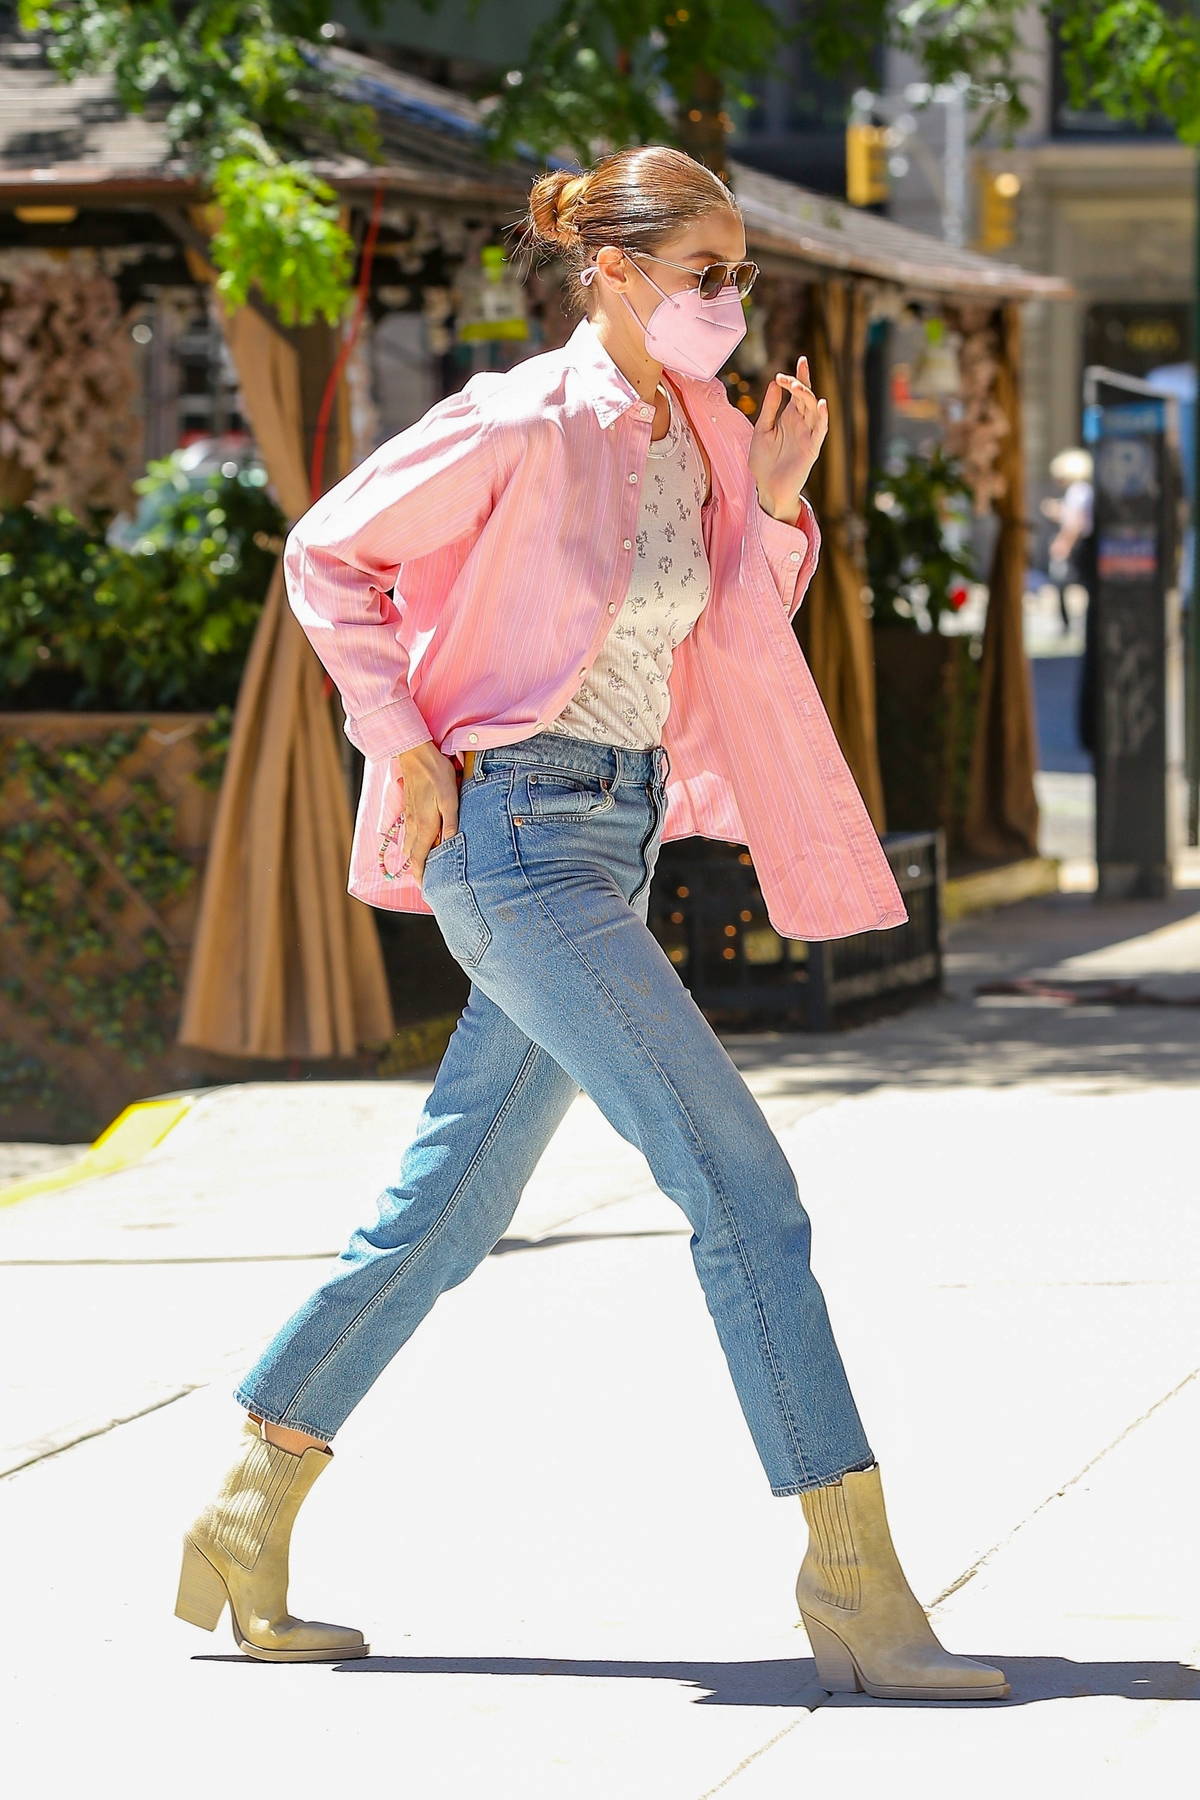 Gigi Hadid looks fab in an unbuttoned pink shirt and blue jeans as she arrives back at her apartment in New York City